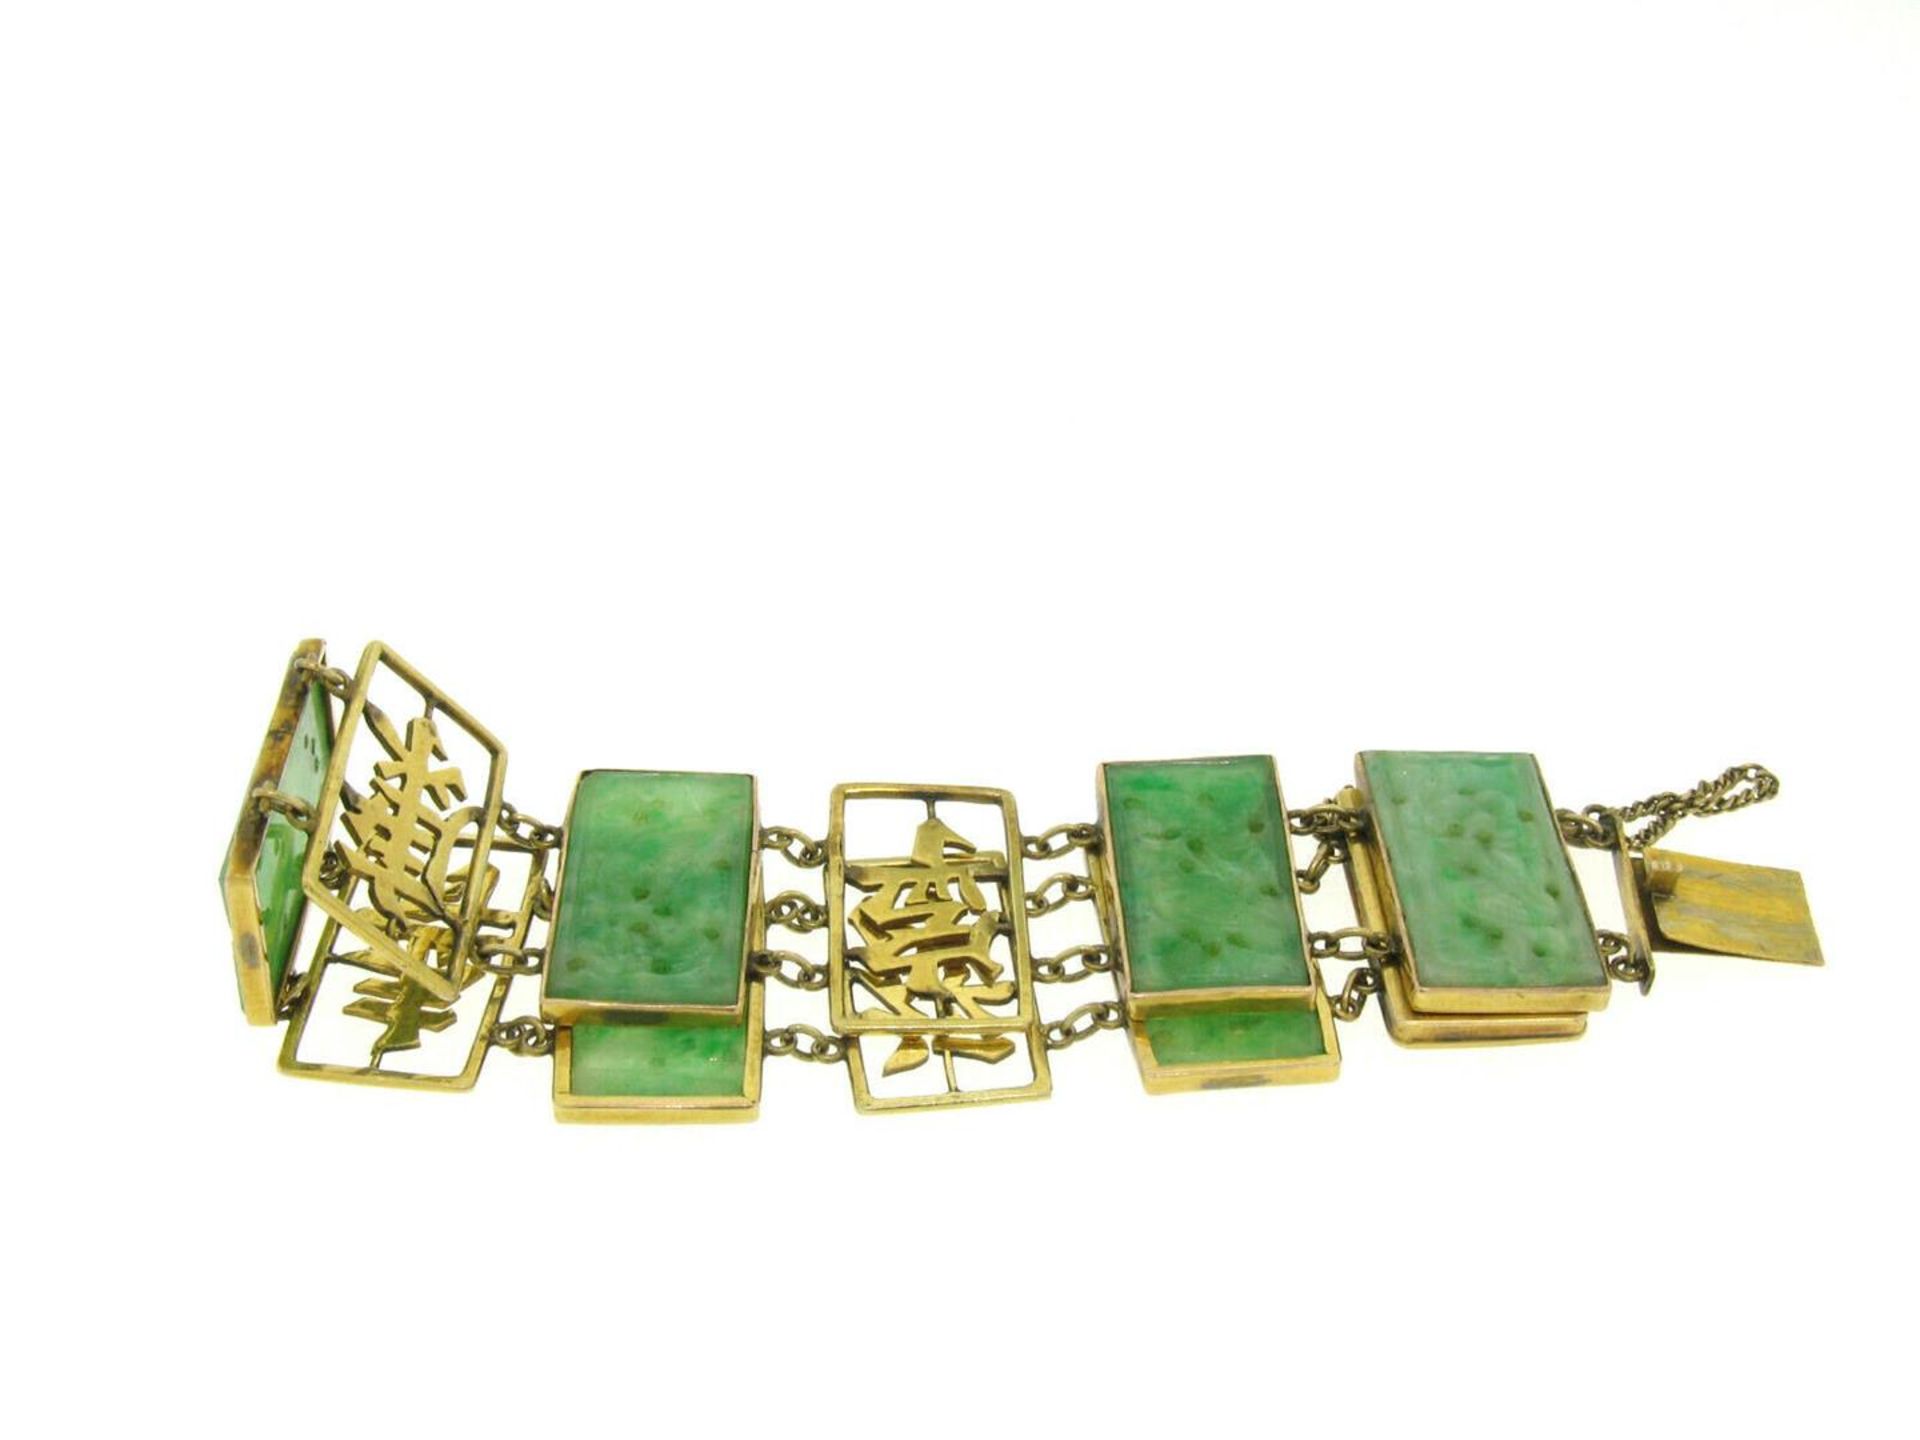 Antique Chinese Solid 14k Yellow Gold Large WIDE Hand Carved Jade Link Bracelet - Image 4 of 6